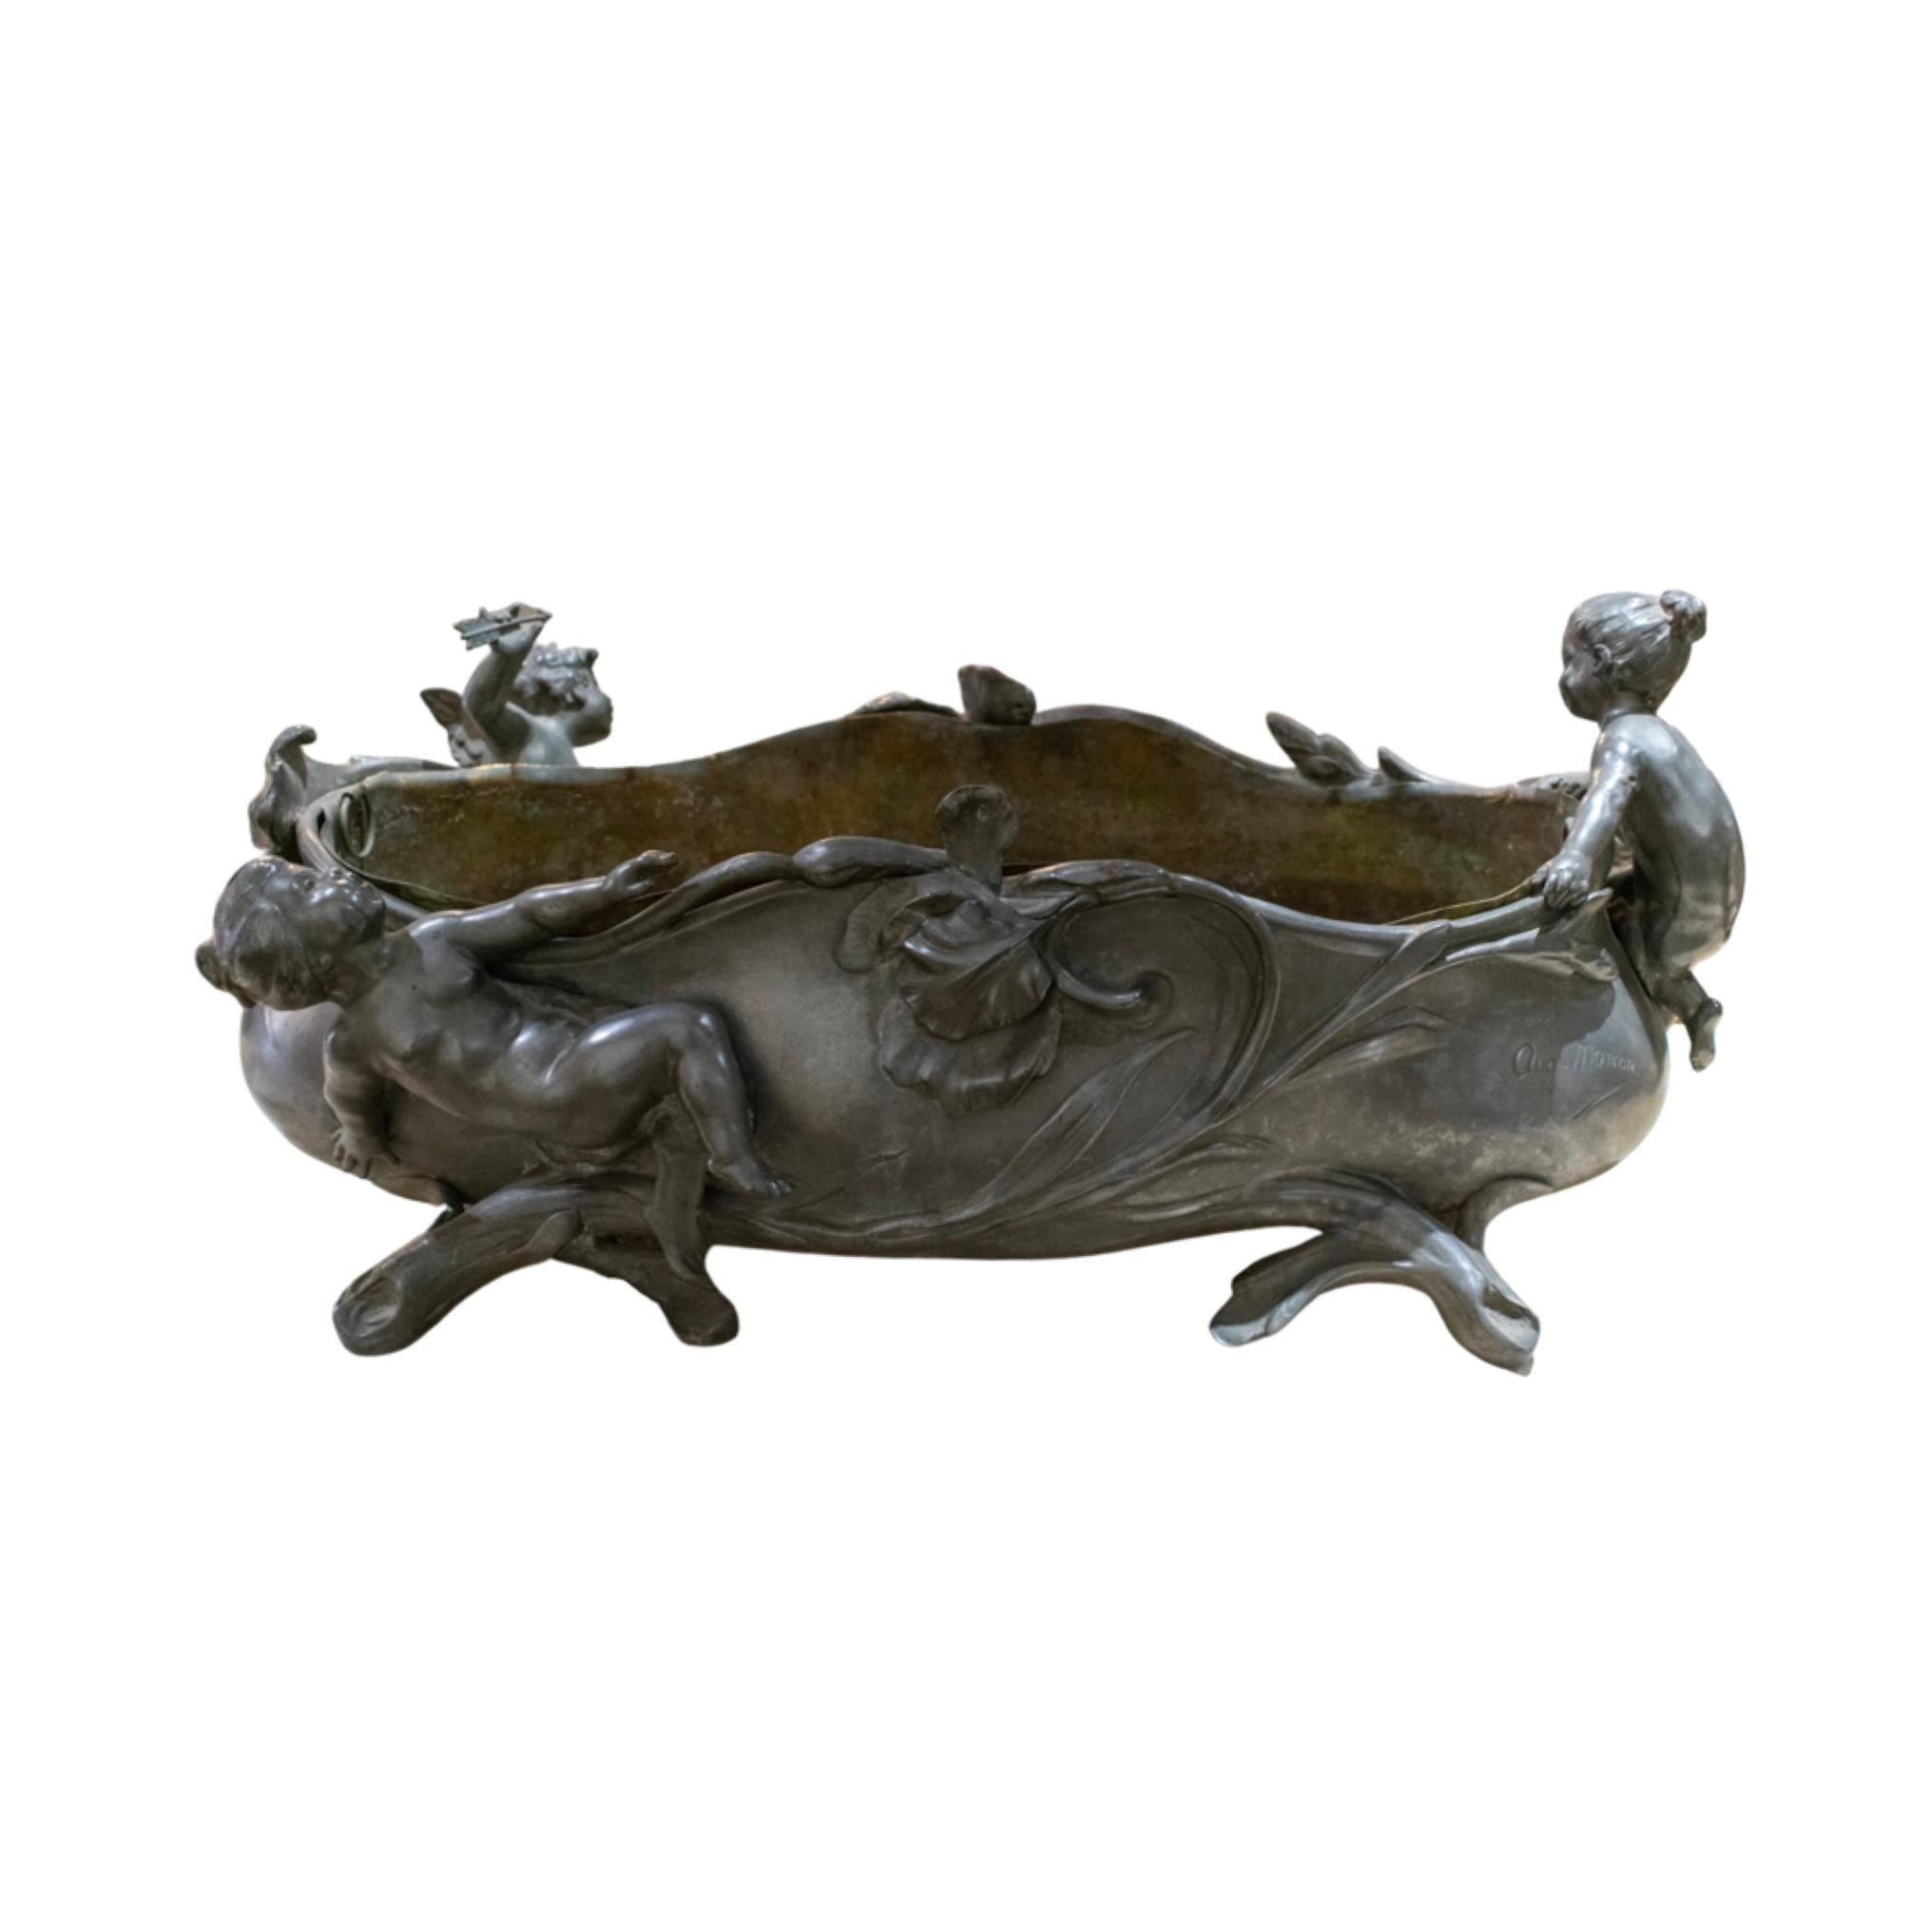 Decorative centerpiece made out of Pewter. Shallow opening in the center for storage. Craved angel figures along the sides. Originates from France. Signed by Oval Jardiniere. Circa, 1880's.
Regular price
$2,500.00.